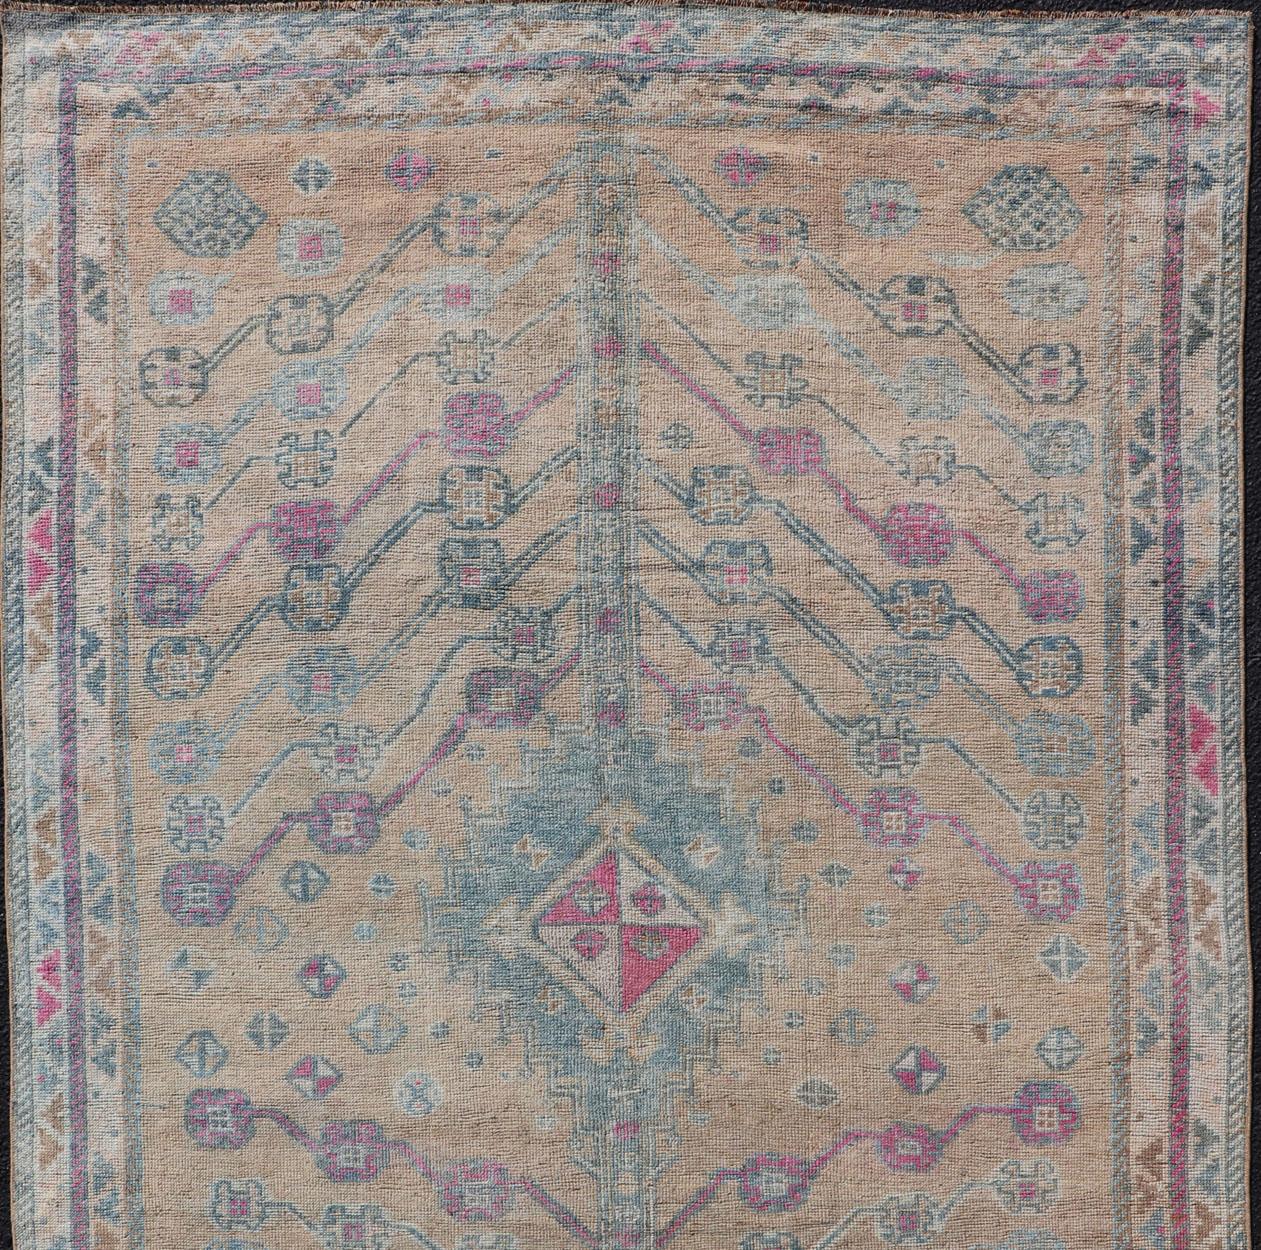 20th Century Vintage Persian Shiraz with Tribal Design in Soft Yellow, Pink, and Blue Gray